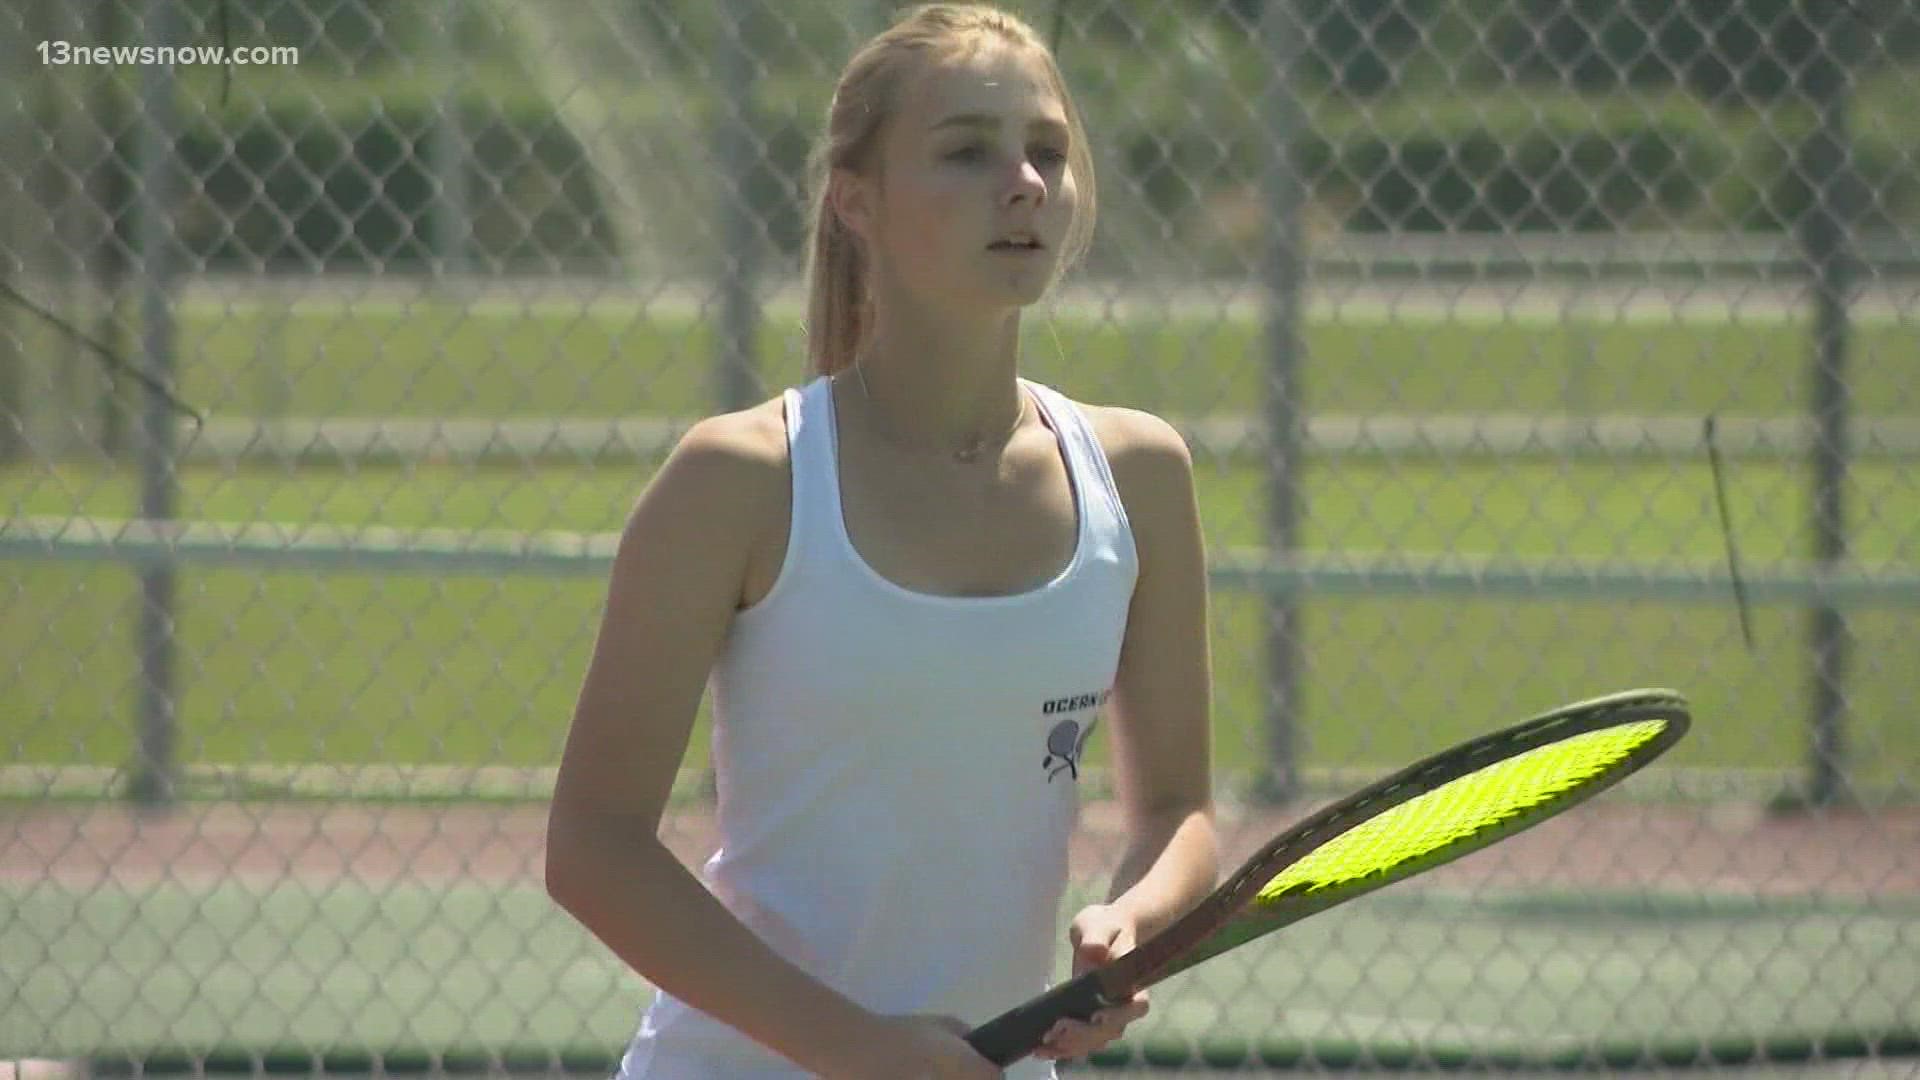 The Ocean Lakes tennis star has other interest beyond her sport